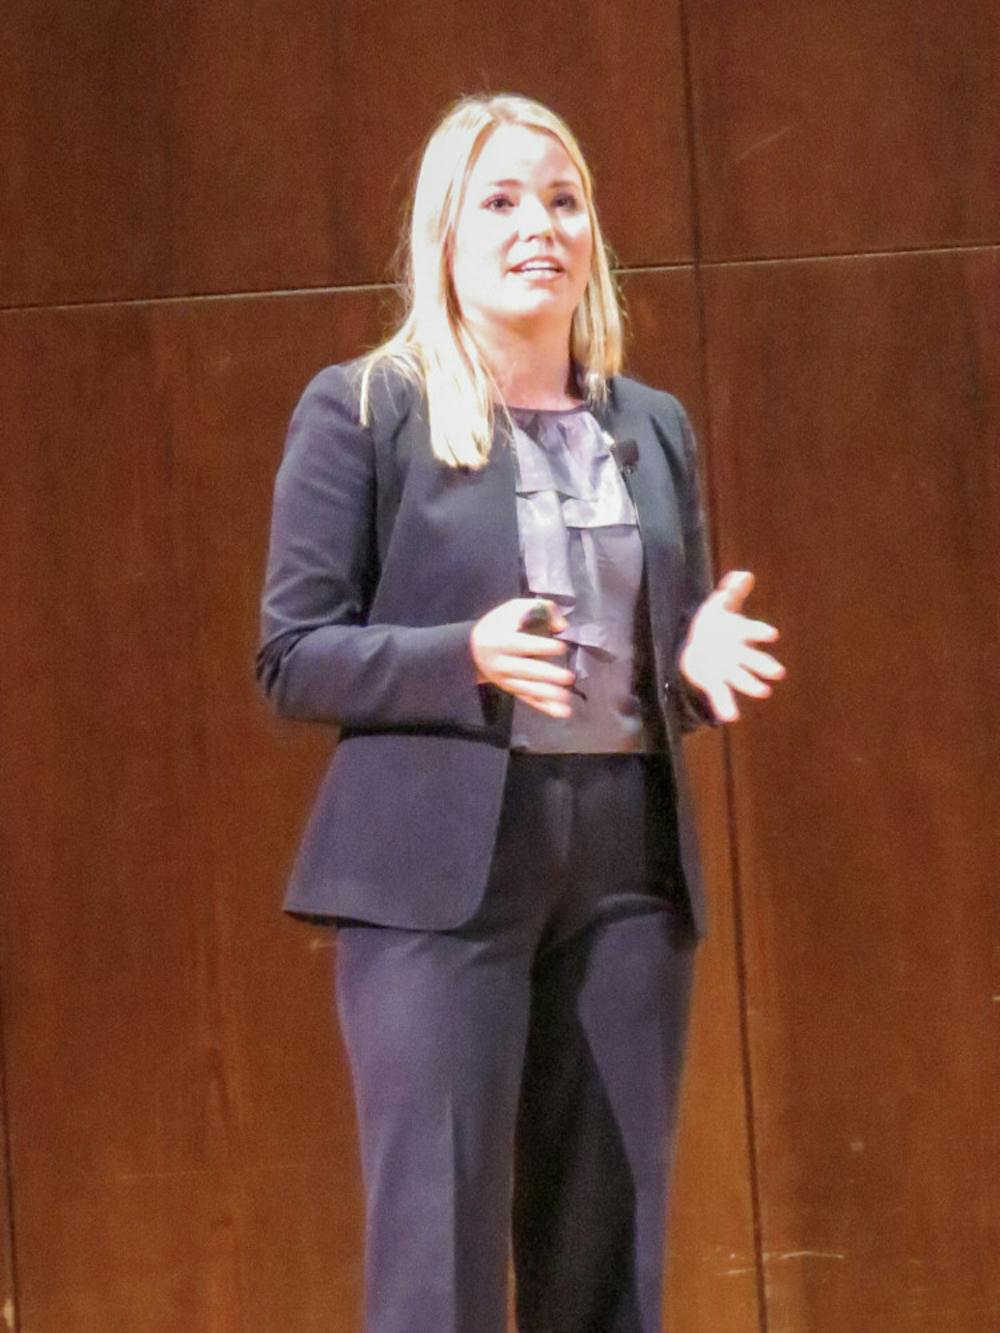 <p dir="ltr">UF Student Body President Susan Webster speaks to students and faculty members in the University Auditorium during the State of the Campus Address on Tuesday night. Webster outlined Student Government’s recent accomplishments and goals.</p>